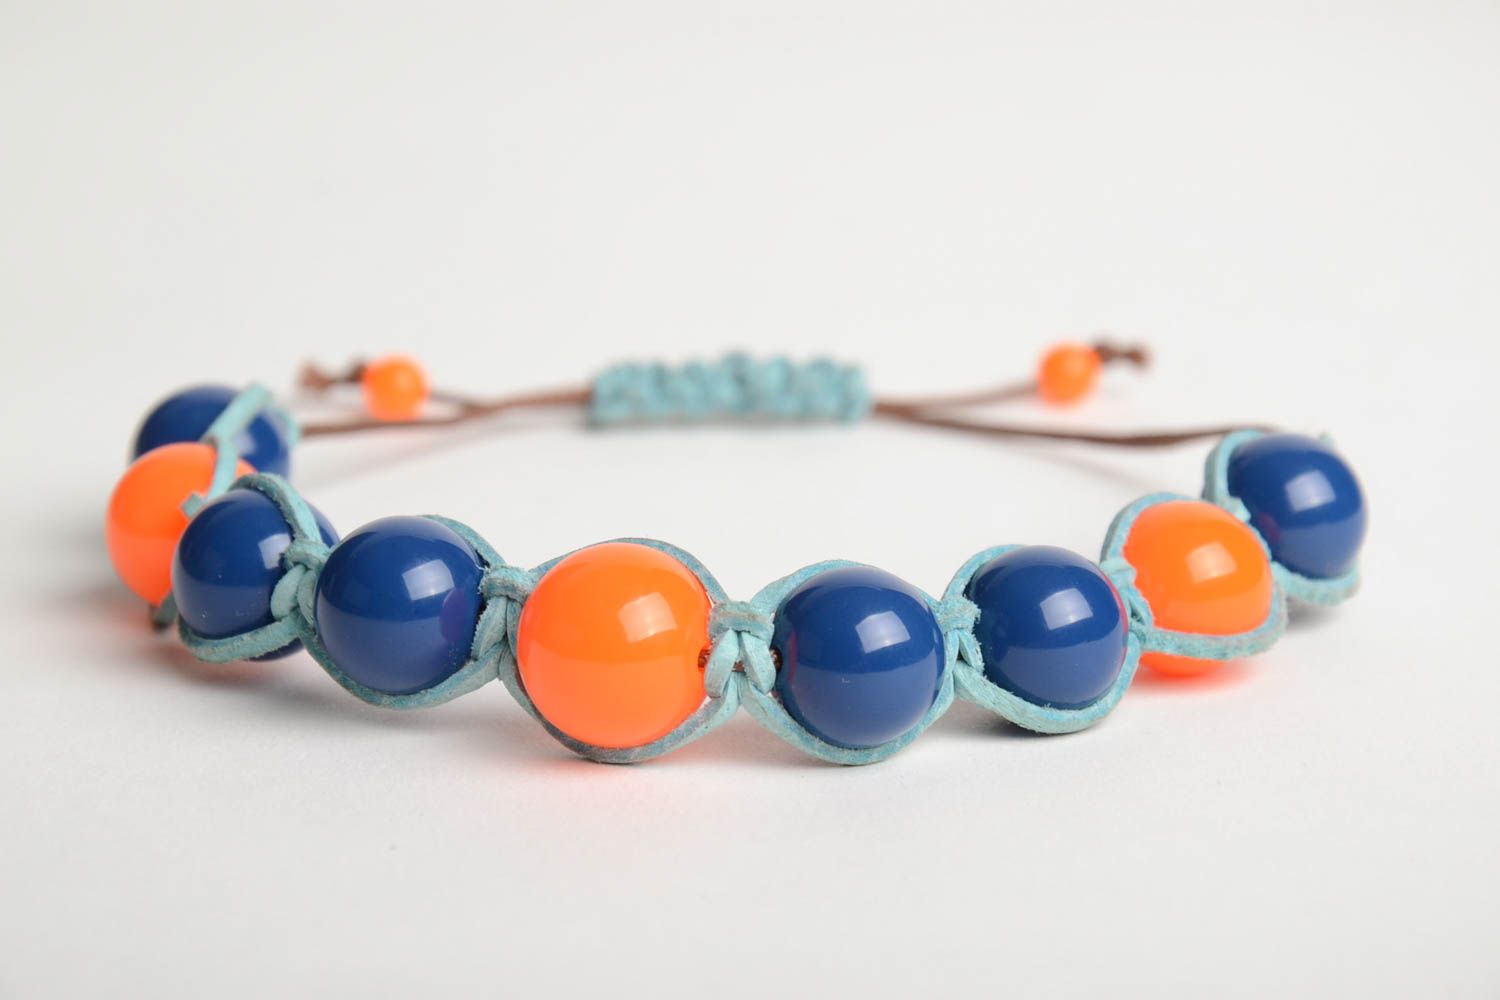 Handmade wrist bracelet woven of blue waxed cord and colorful plastic beads photo 4